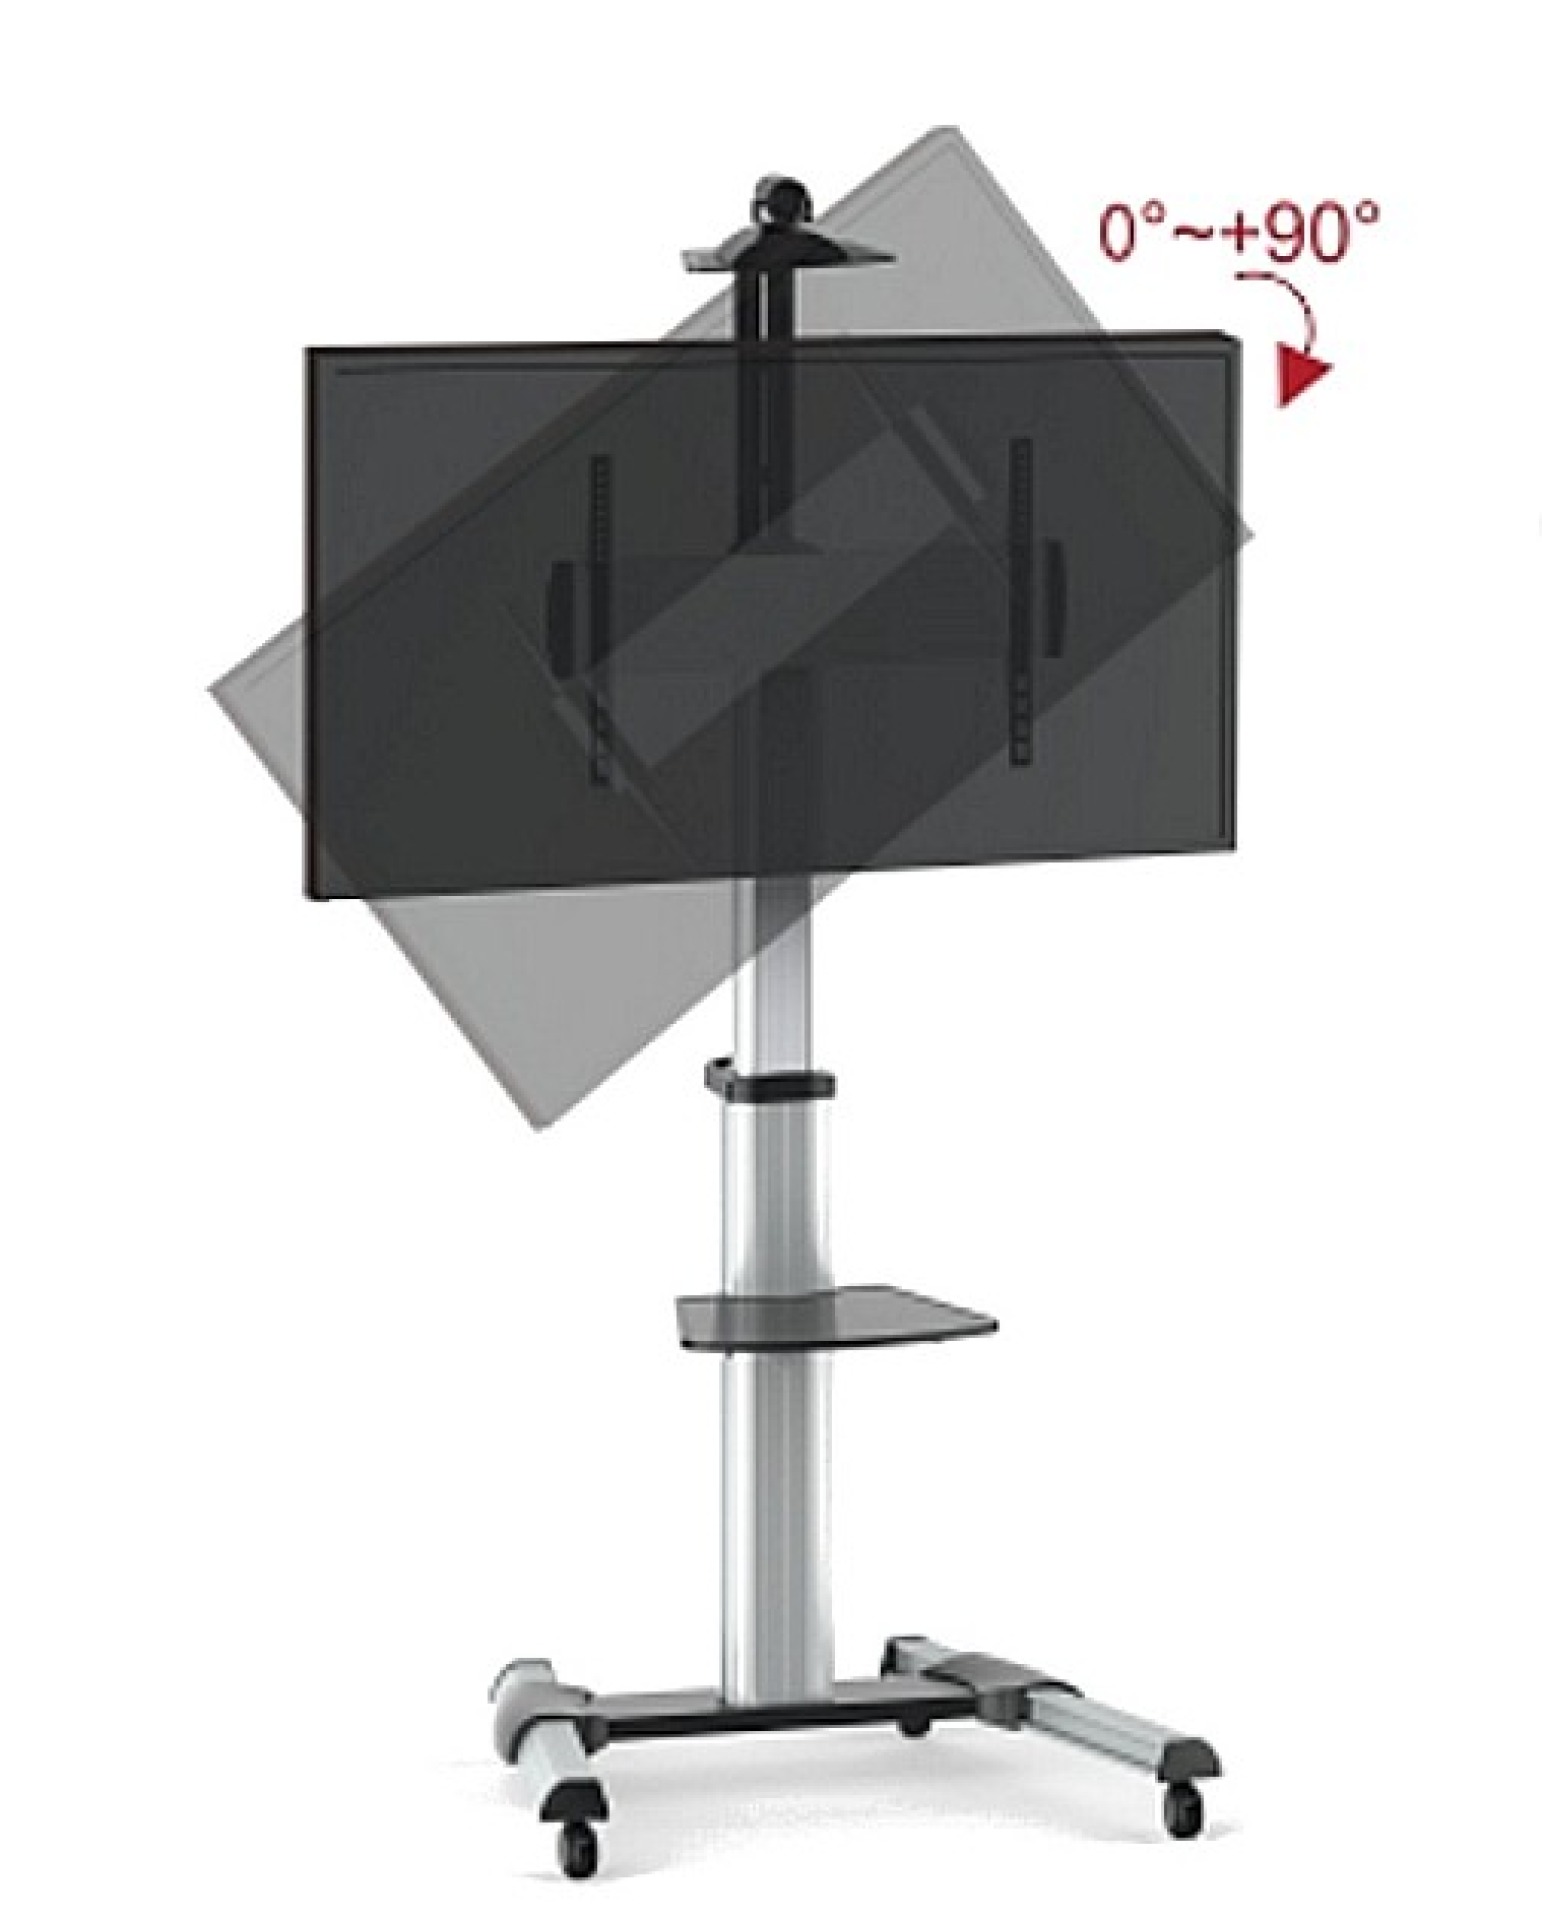 Trolley floor support for LCD LED TV 37-70" with camera shelf